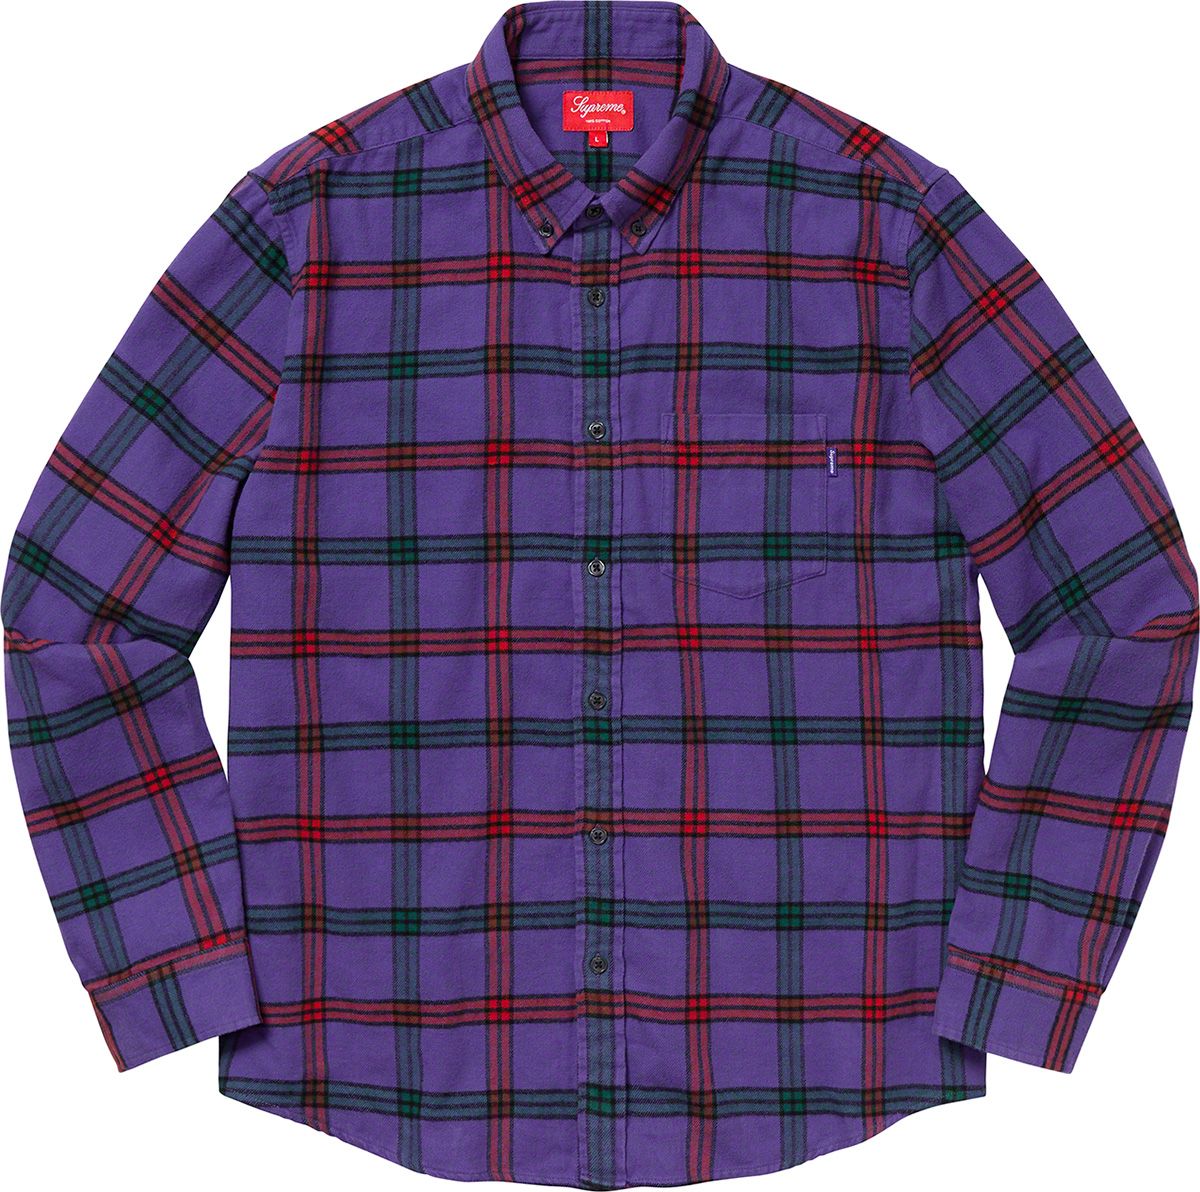 Heavyweight Flannel Shirt - Fall/Winter 2019 Preview – Supreme